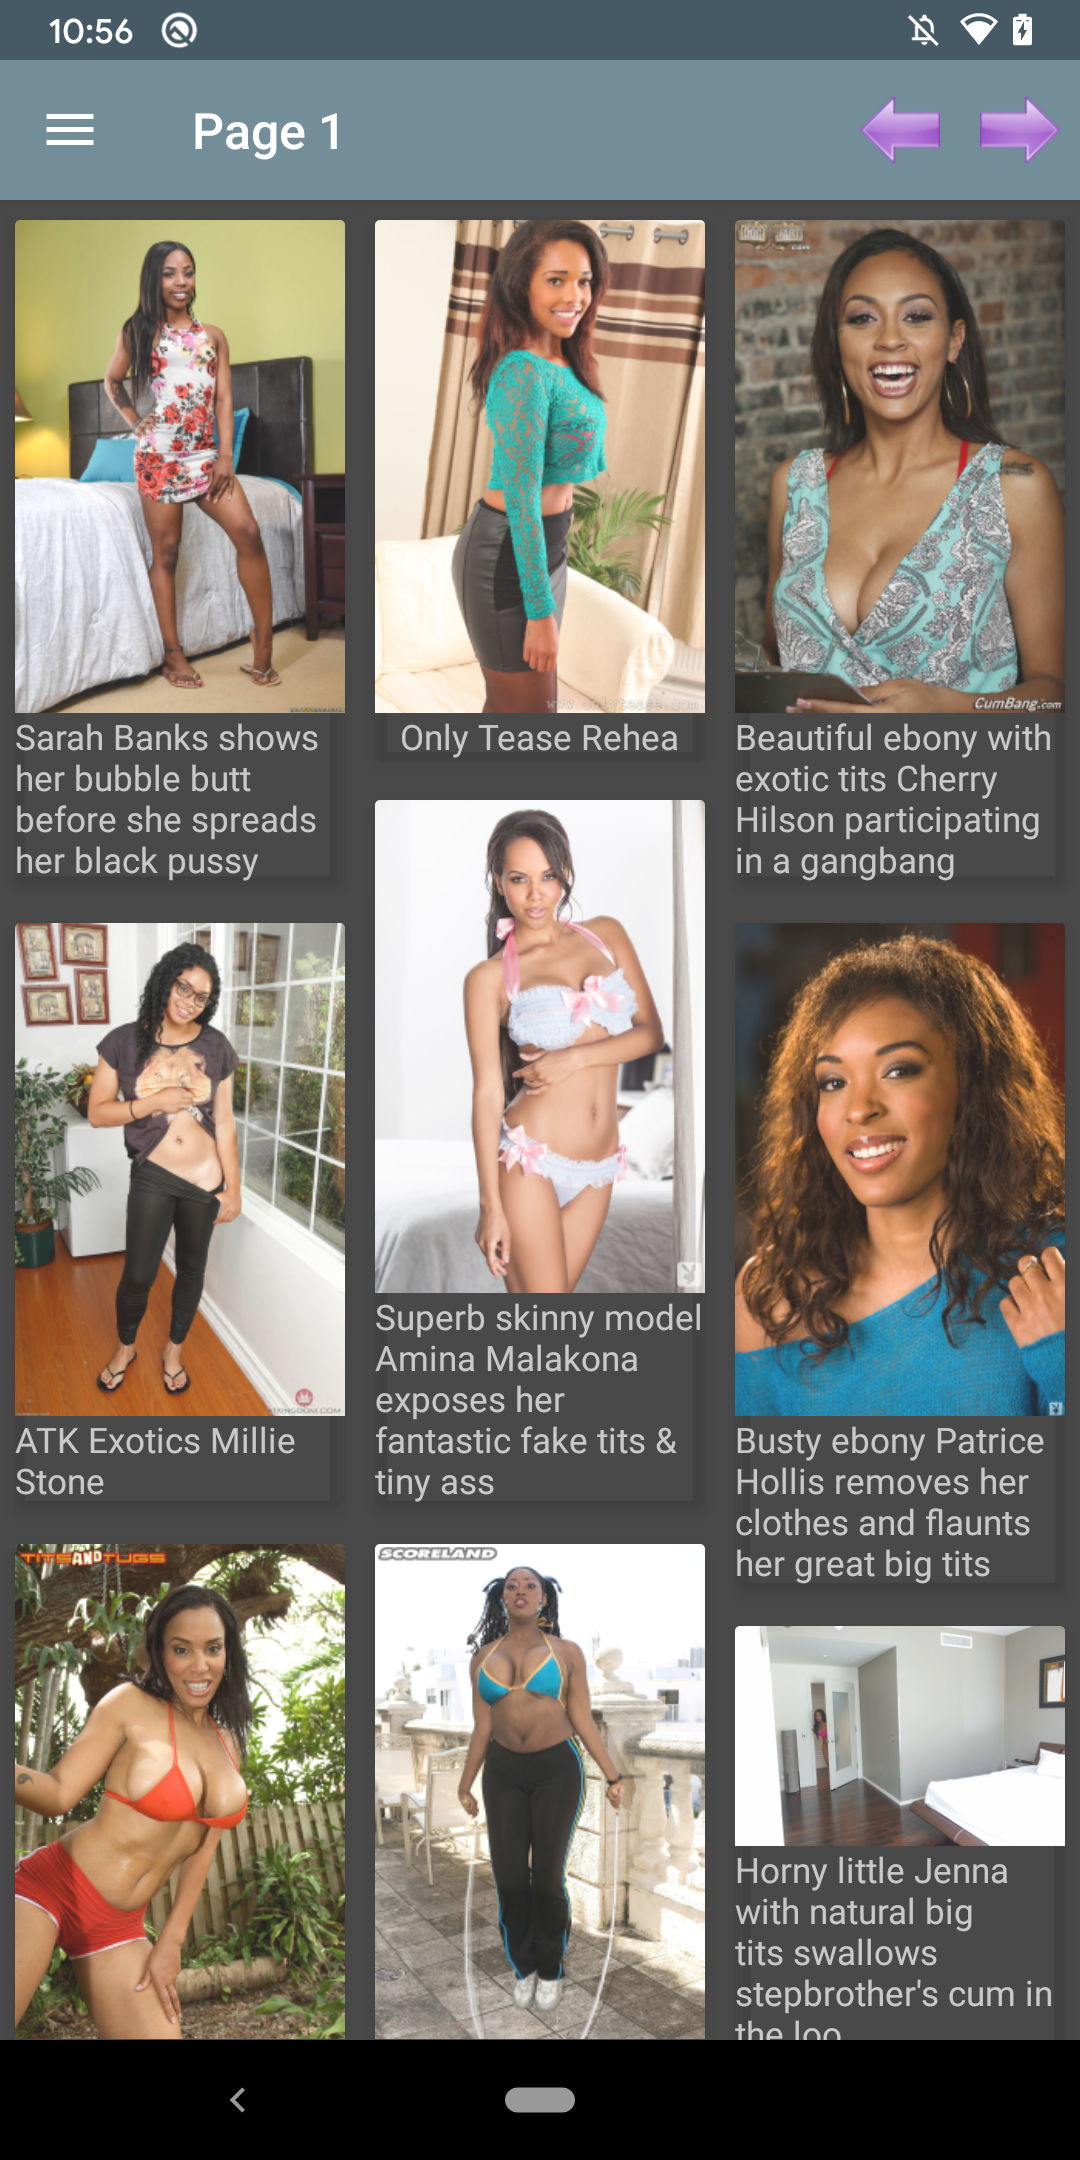 Ebony galleries topless,femboy,sexy,hentai,apk,download,wallpapers,android,nhentai,galleries,hot,apps,porn,editor,photo,picture,gloryhole,app,panties,rated,puzzles,for,gallery,anime,game,and